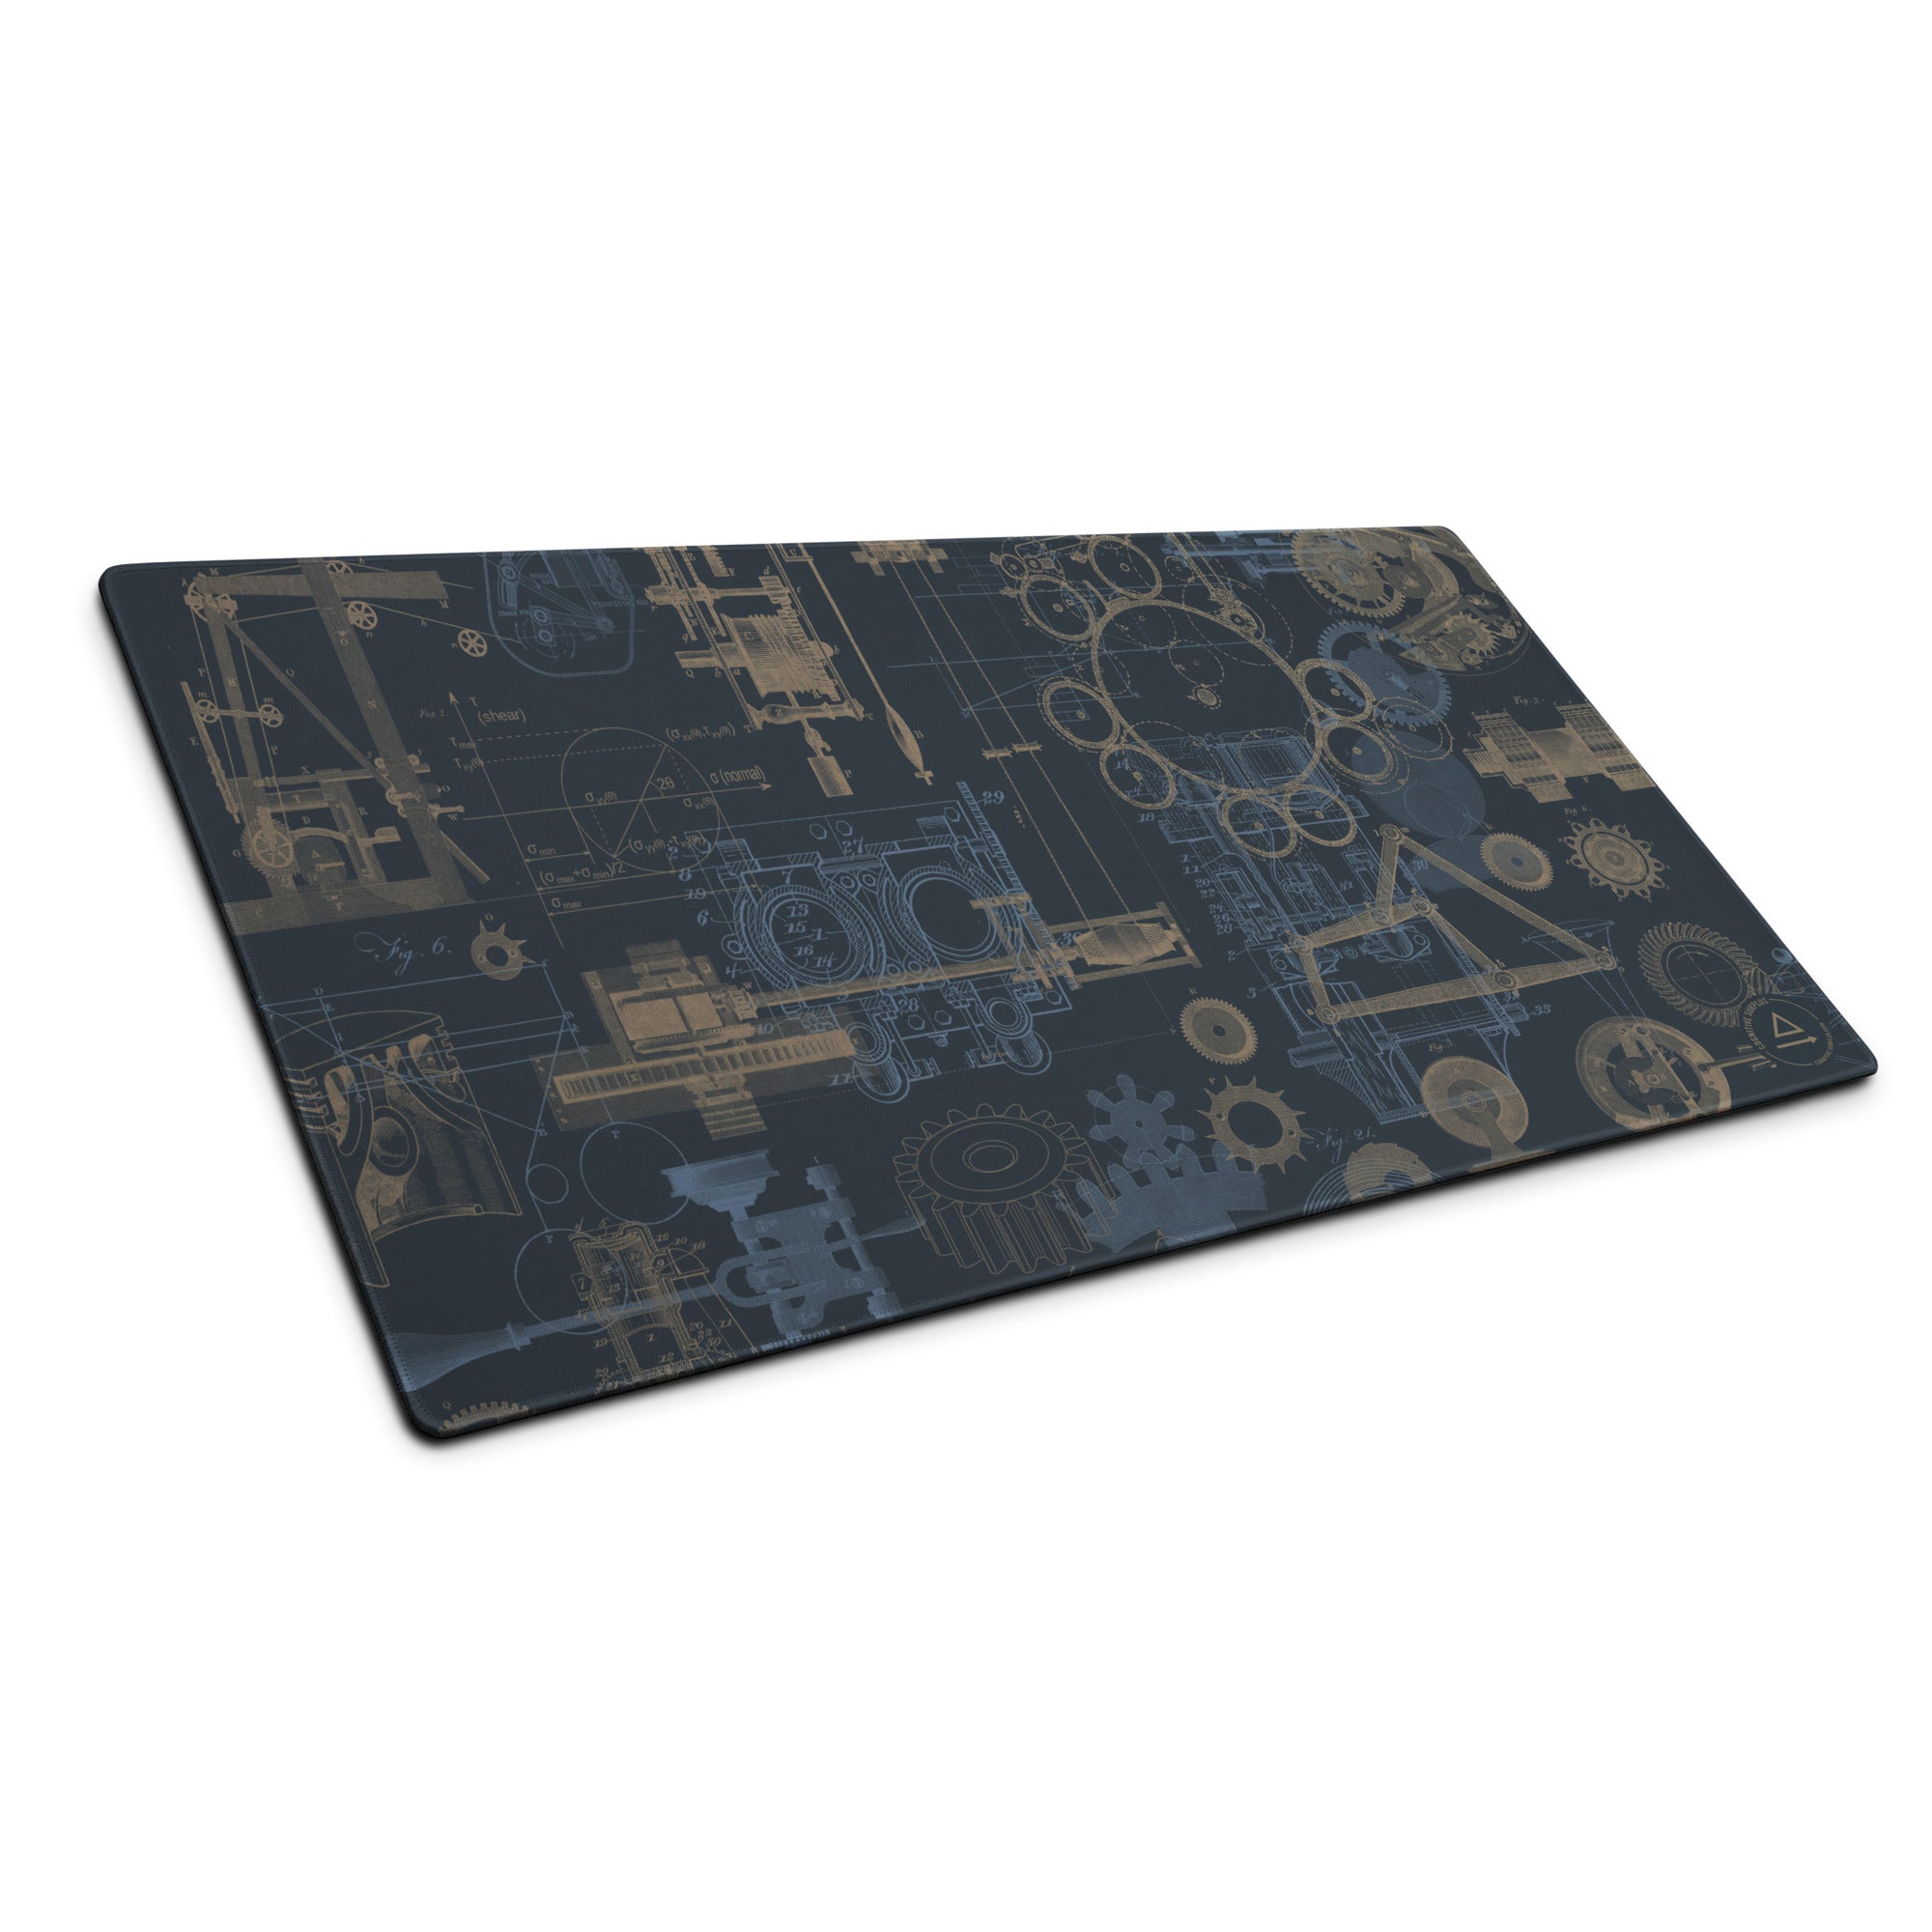 gaming-mouse-pad-white-36x18-front-6595e614debe9.jpg